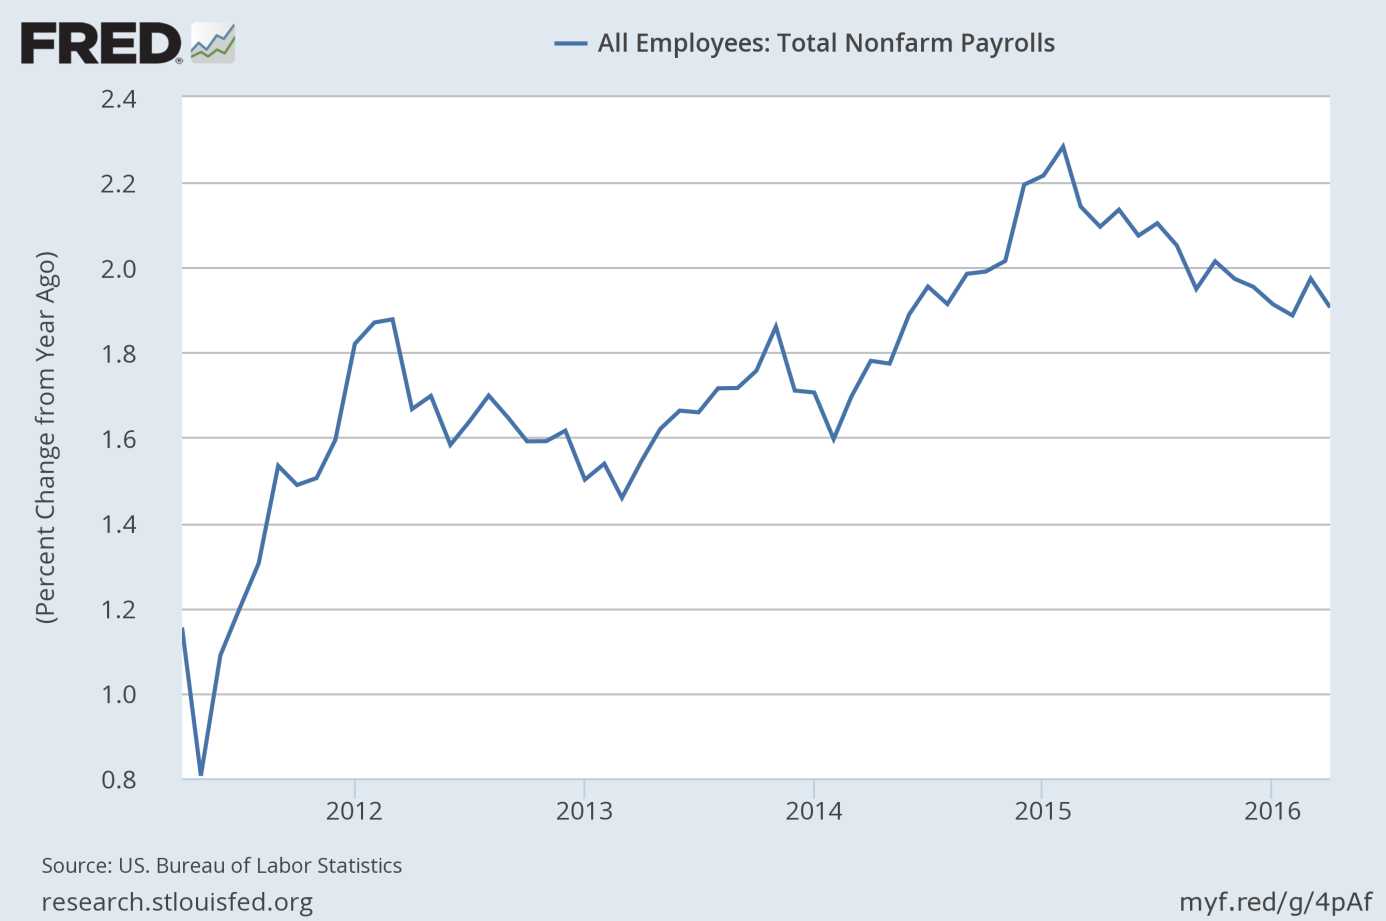 Total nonfarm payrolls as percent change from year ago from 2011 to 2016.